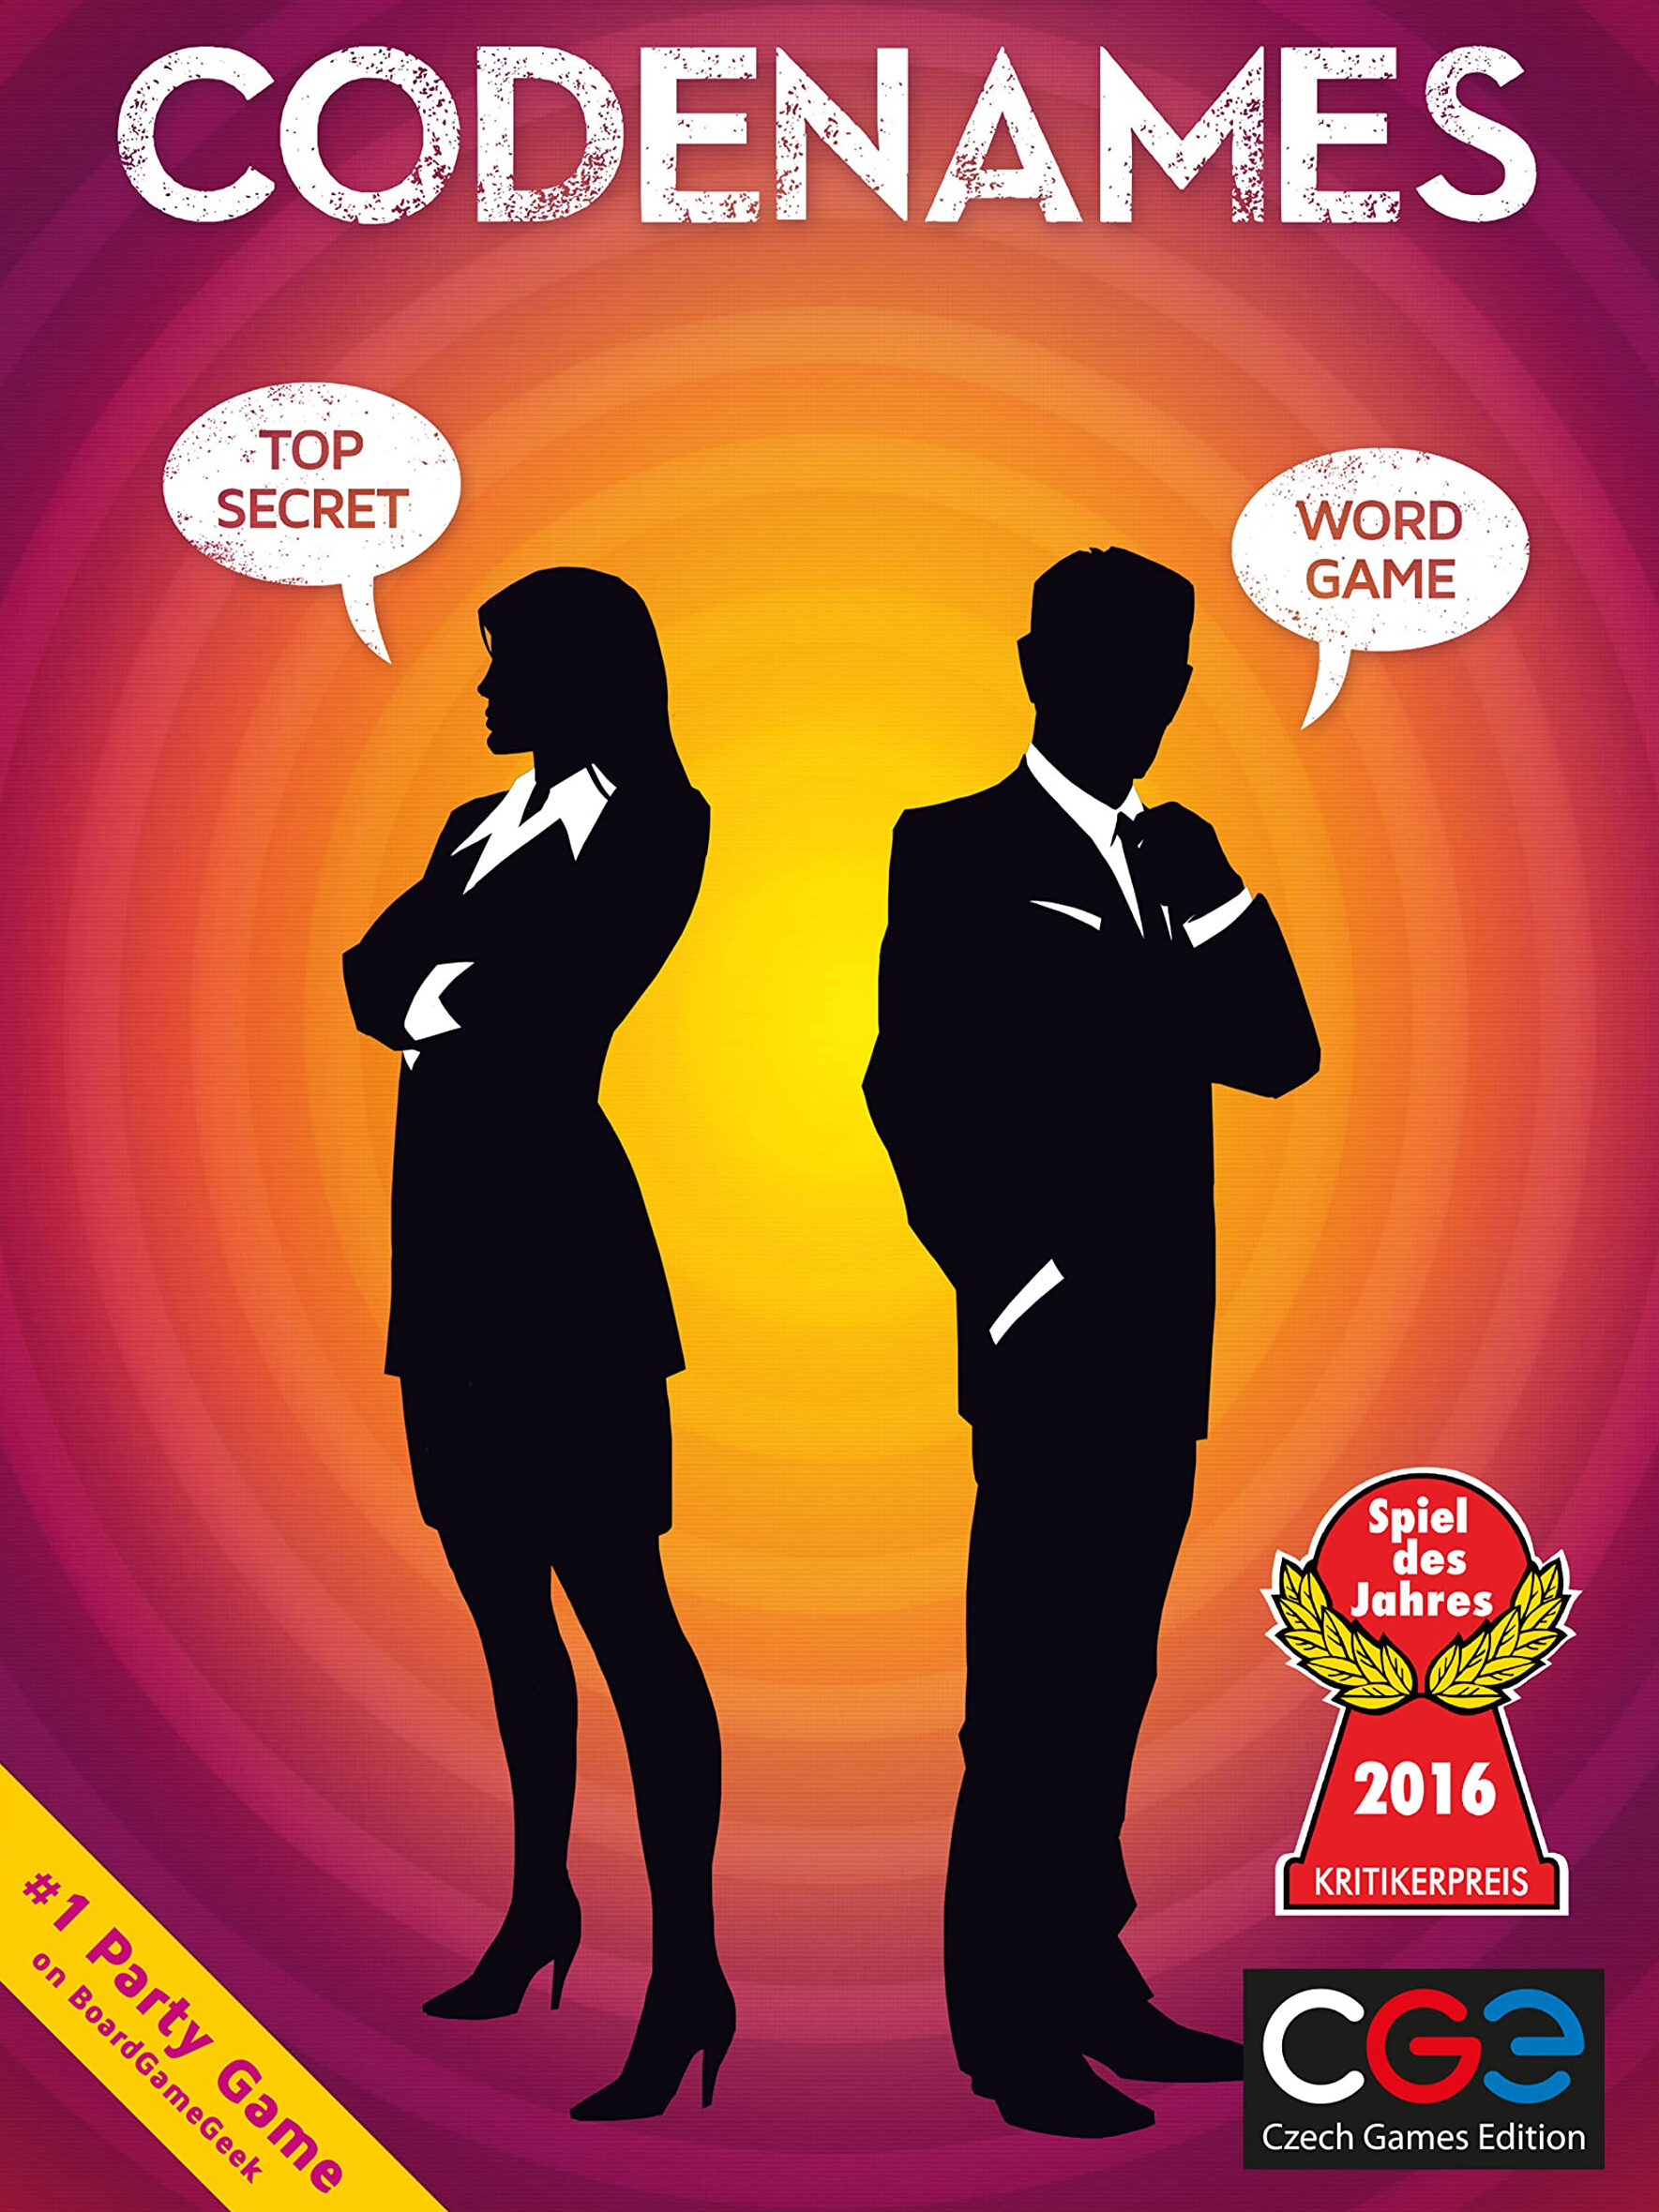 Promotional poster of the 'codenames' word game featuring silhouettes of a man and a woman with an award badge for spiel des jahres 2016.